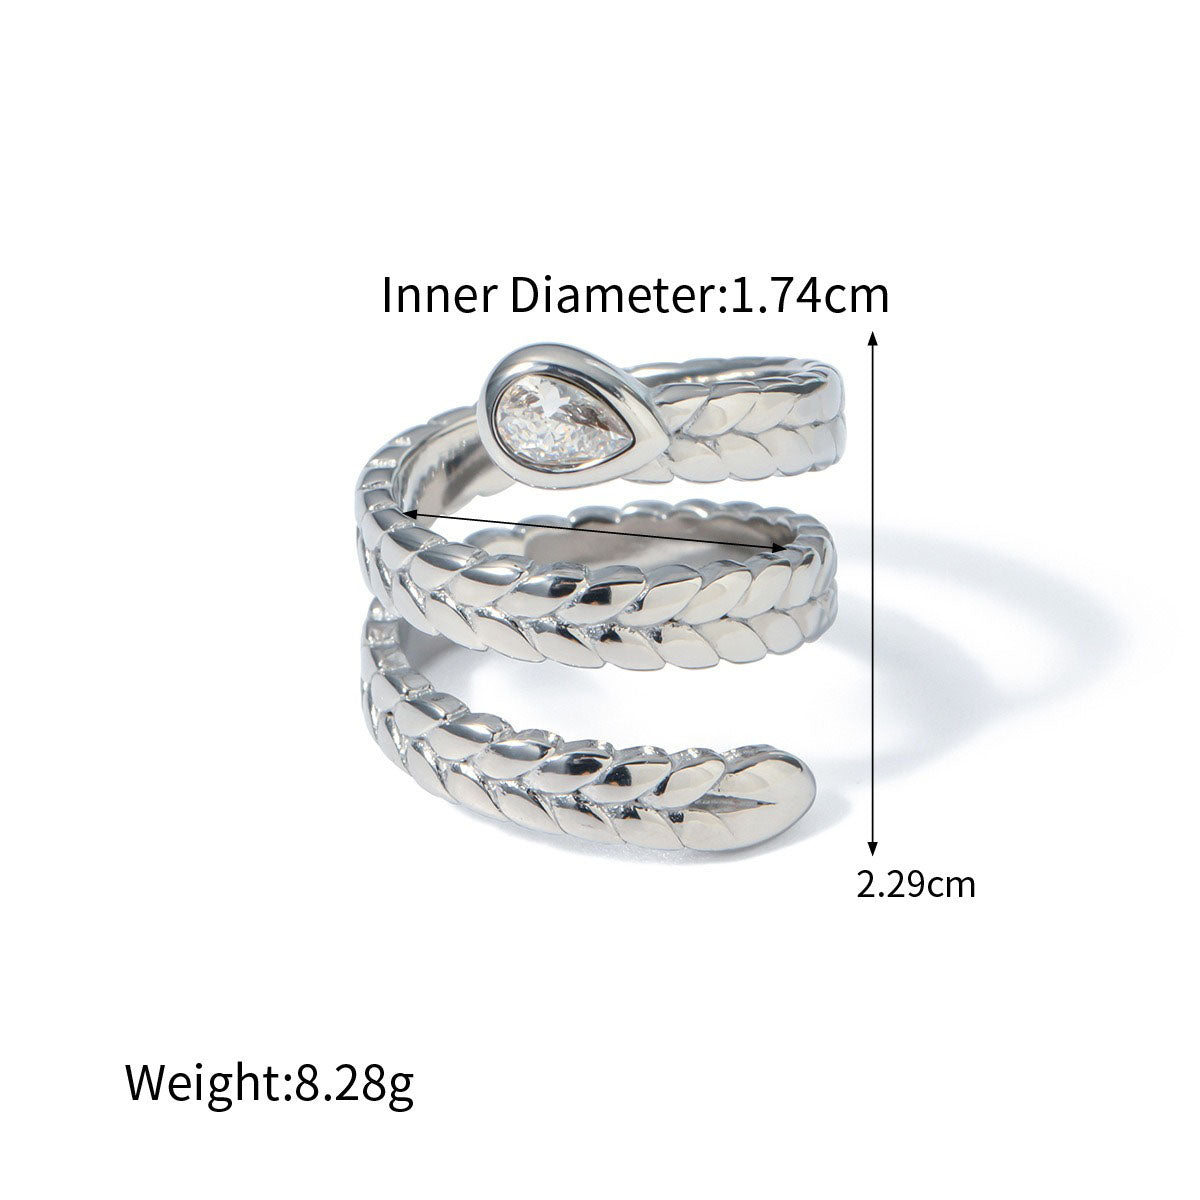 Exquisite and fashionable snake-shaped zircon design ring in 18k gold